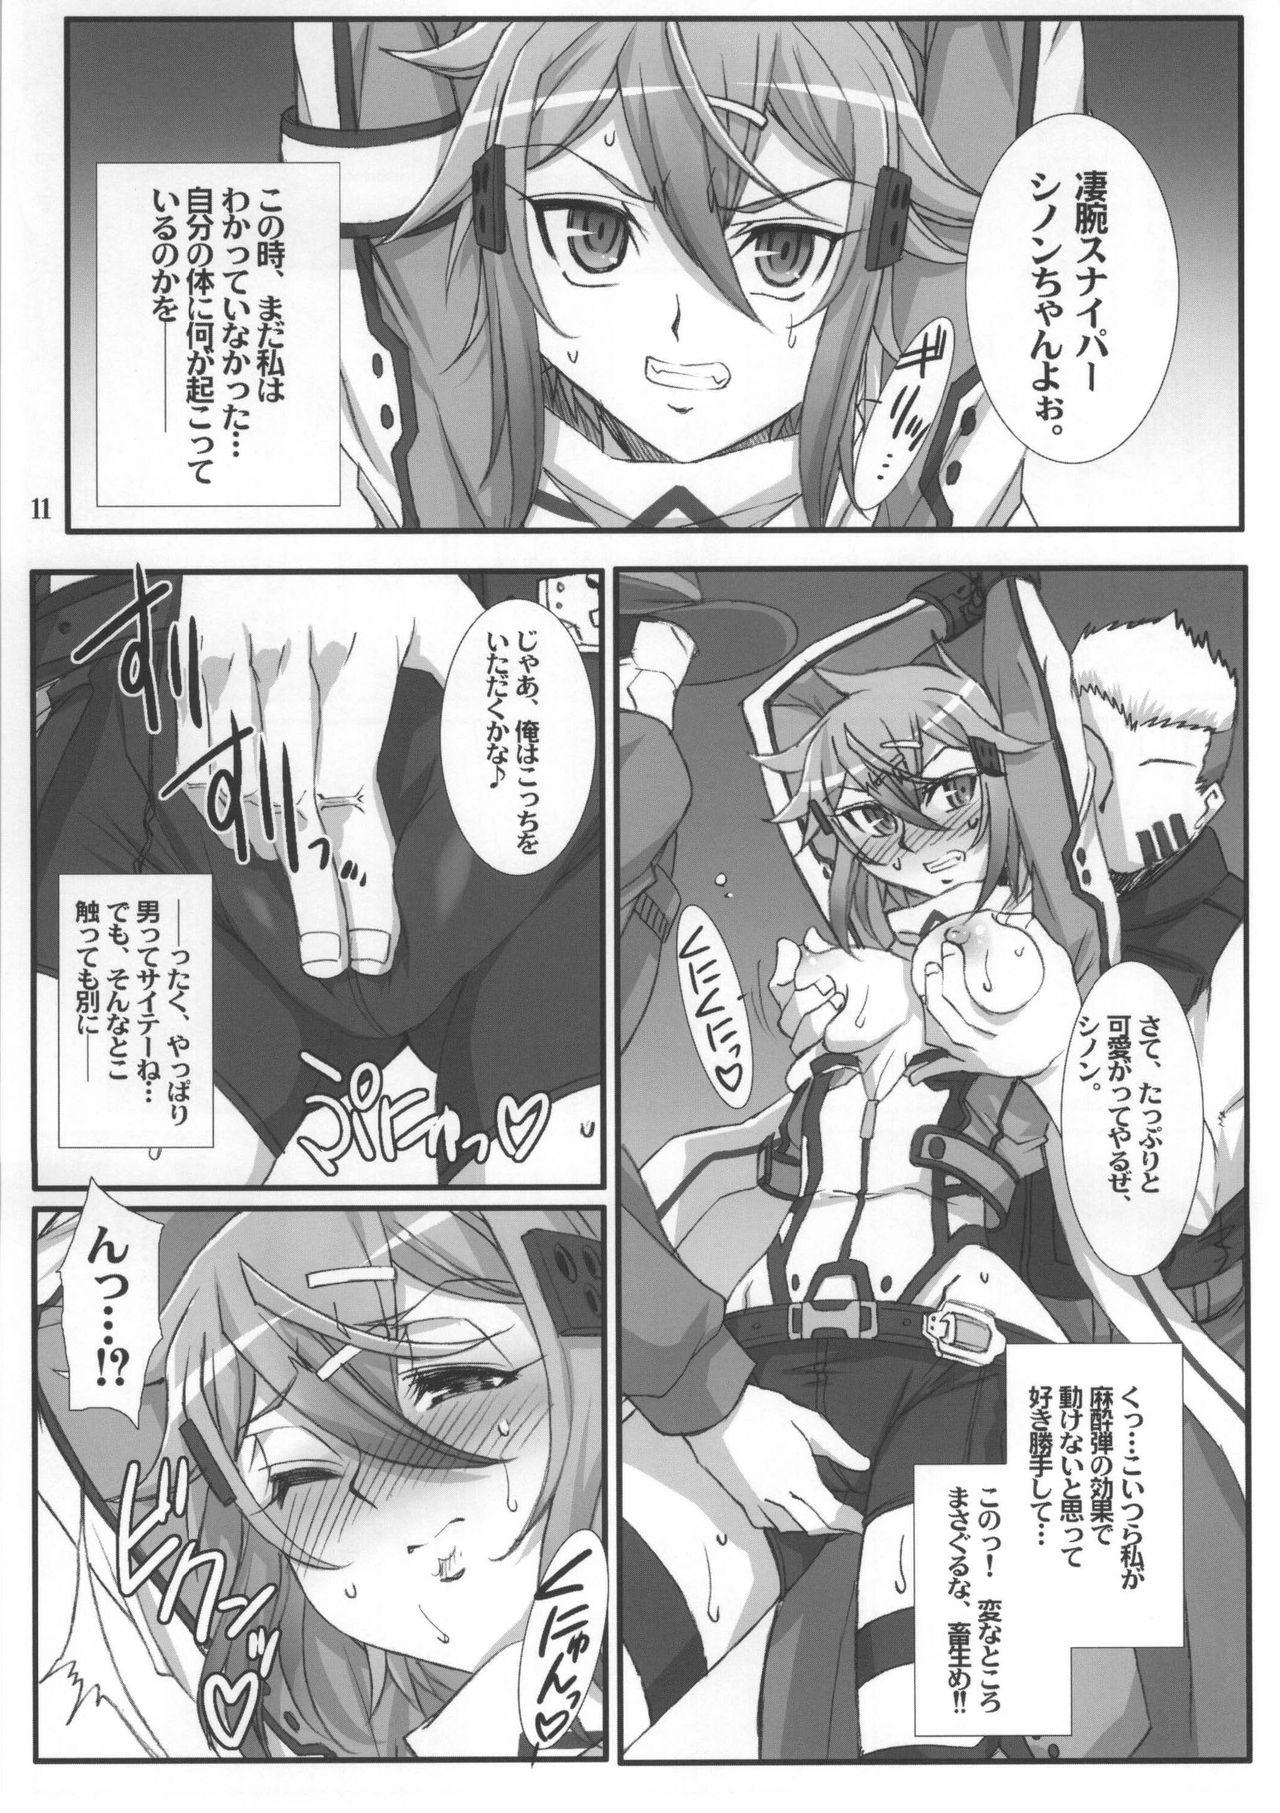 Old Vs Young Honey Bullet - Sword art online Fuck Pussy - Page 8